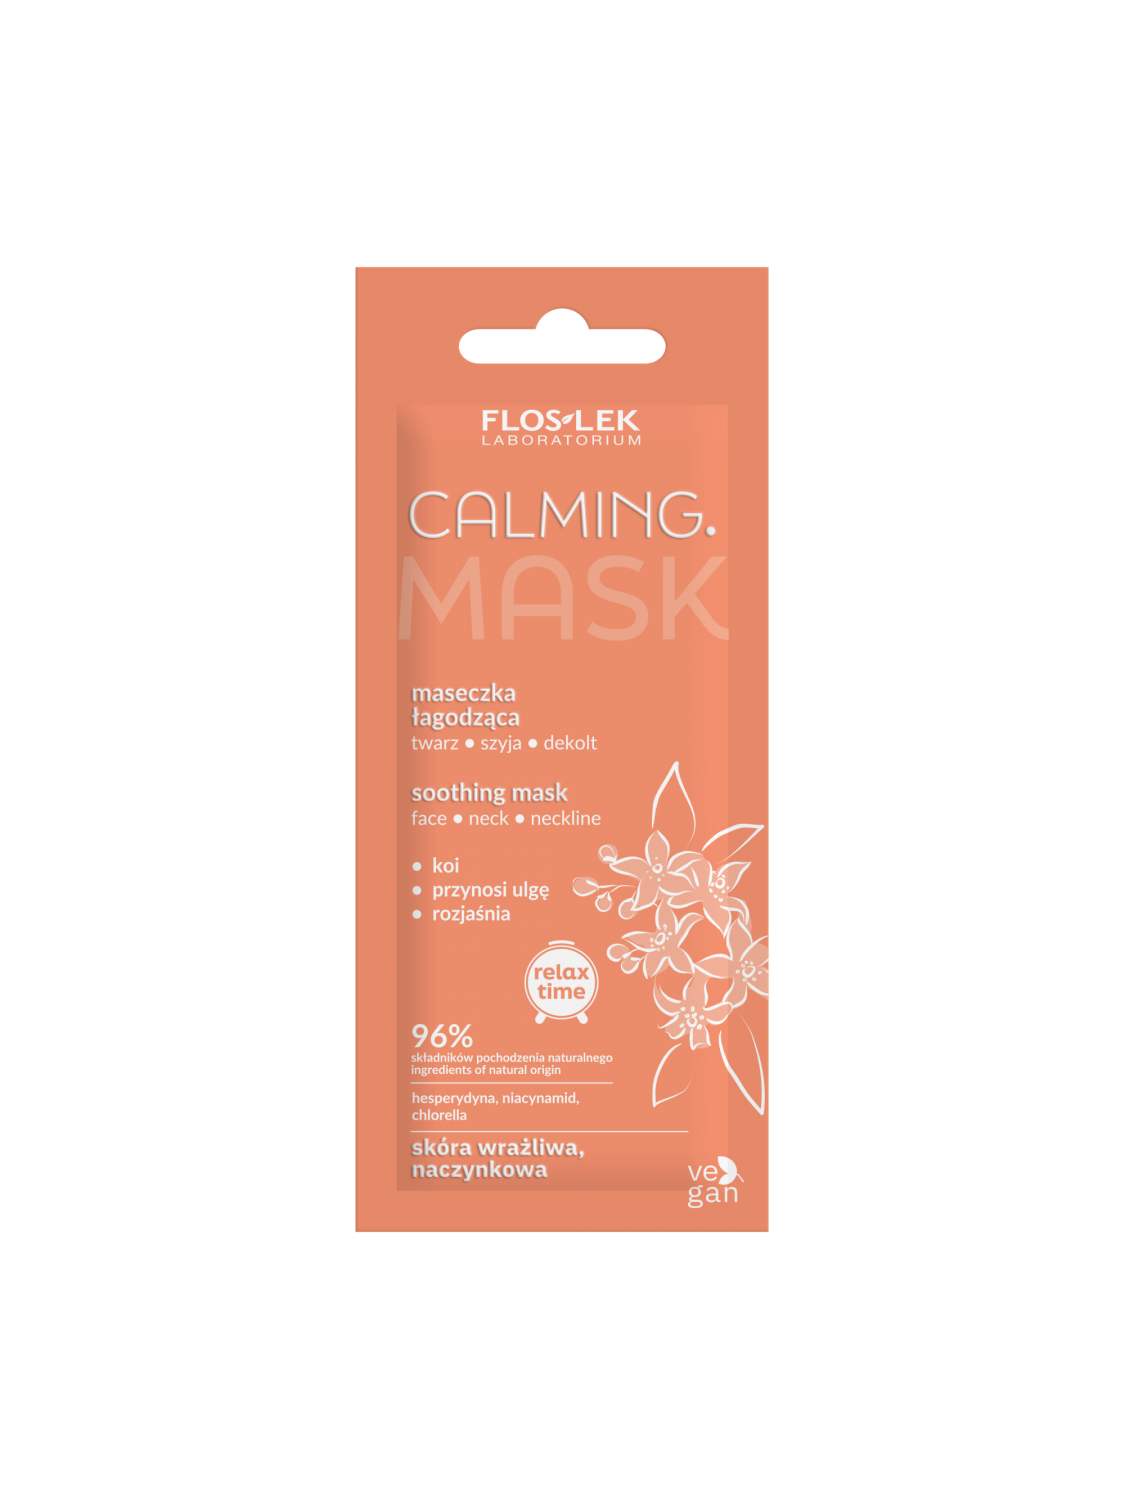 CALMING. Soothing mask for face, neck and décolleté 6 ml - Floslek